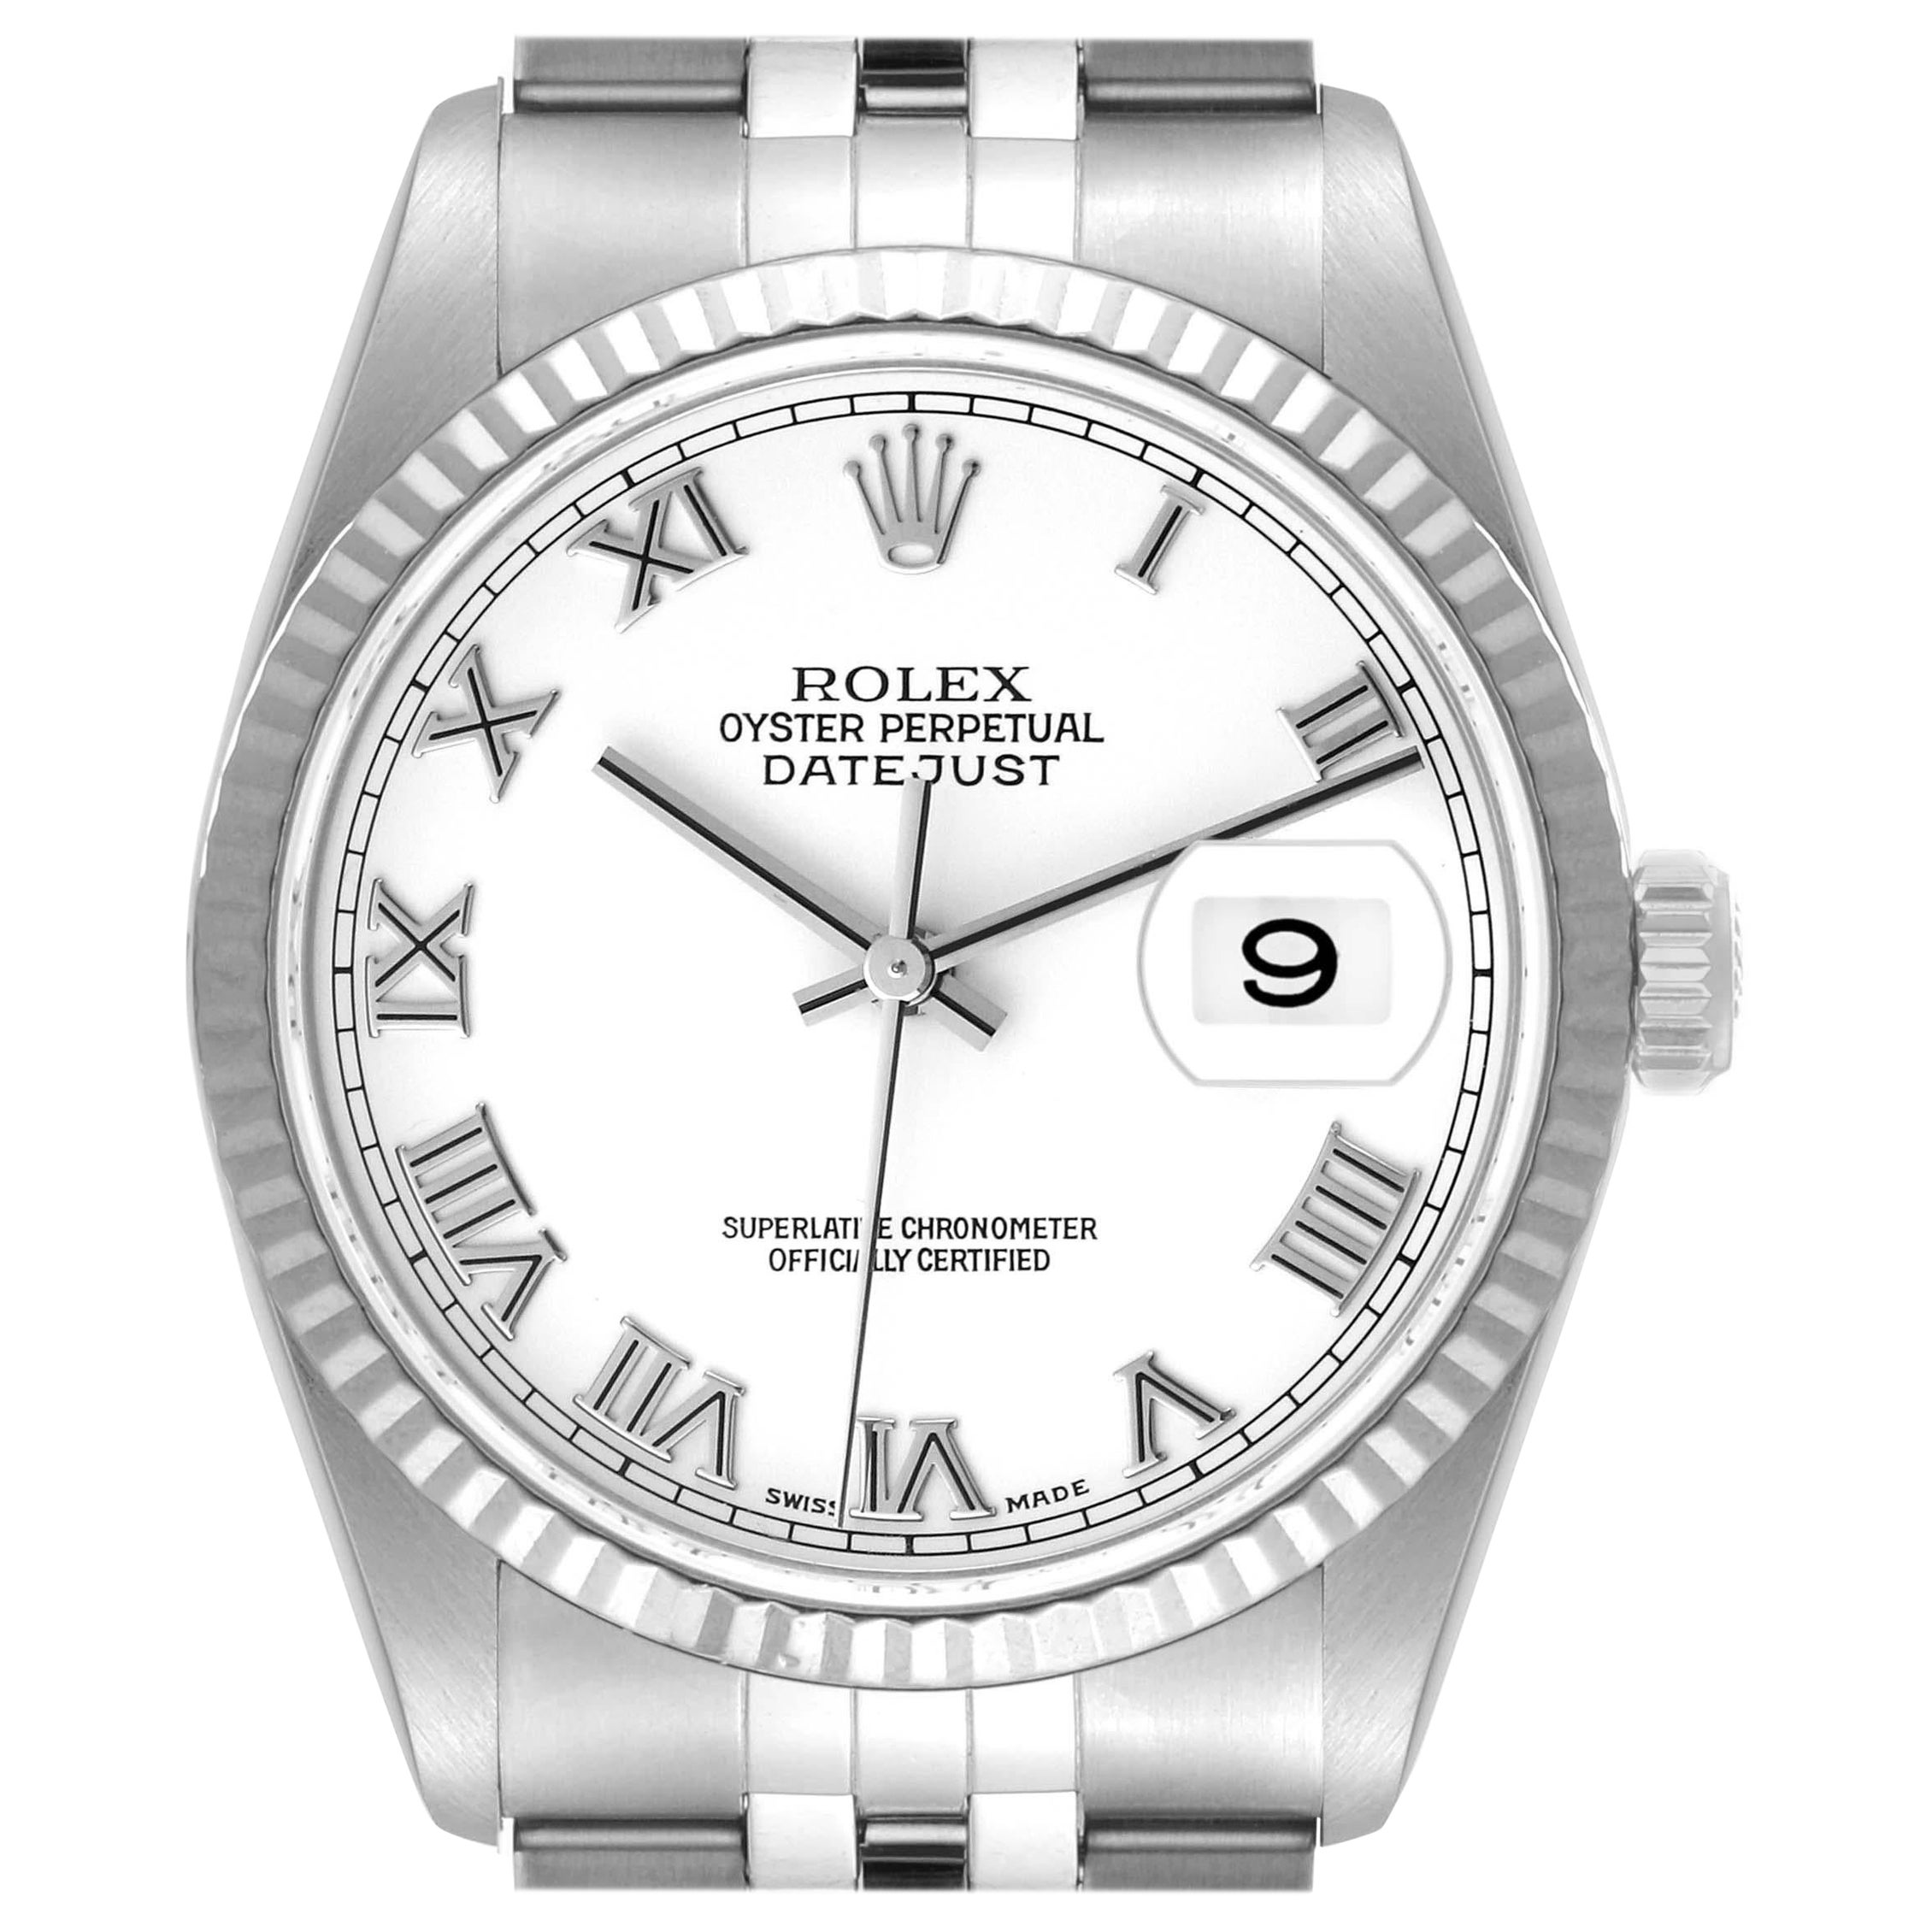 Rolex Datejust Roman Dial Steel White Gold Mens Watch 16234 Box Papers